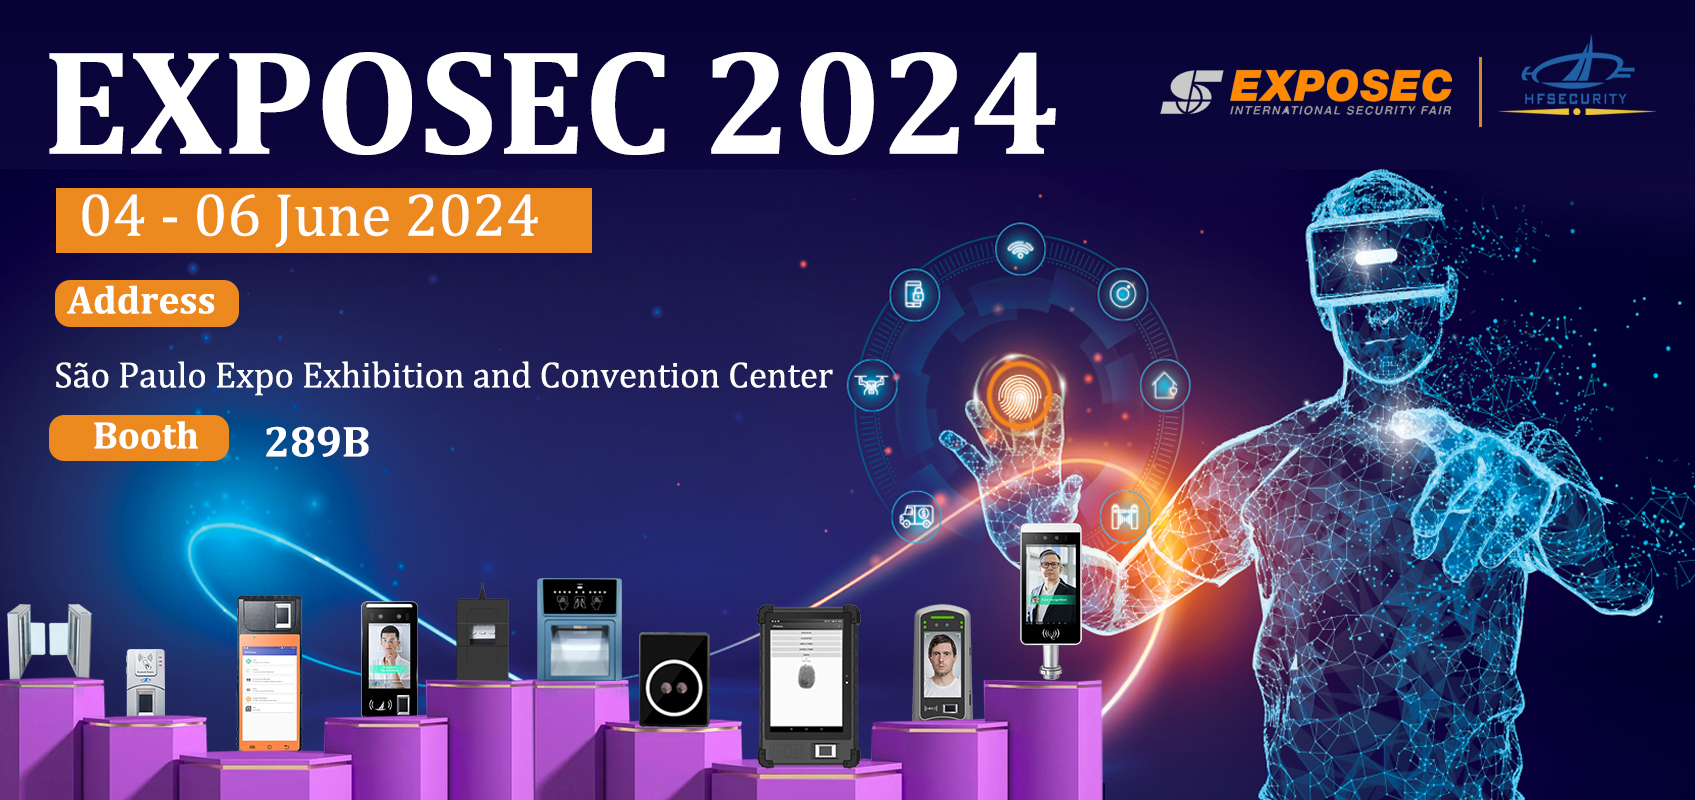 HFSecurity Exposec 2024 